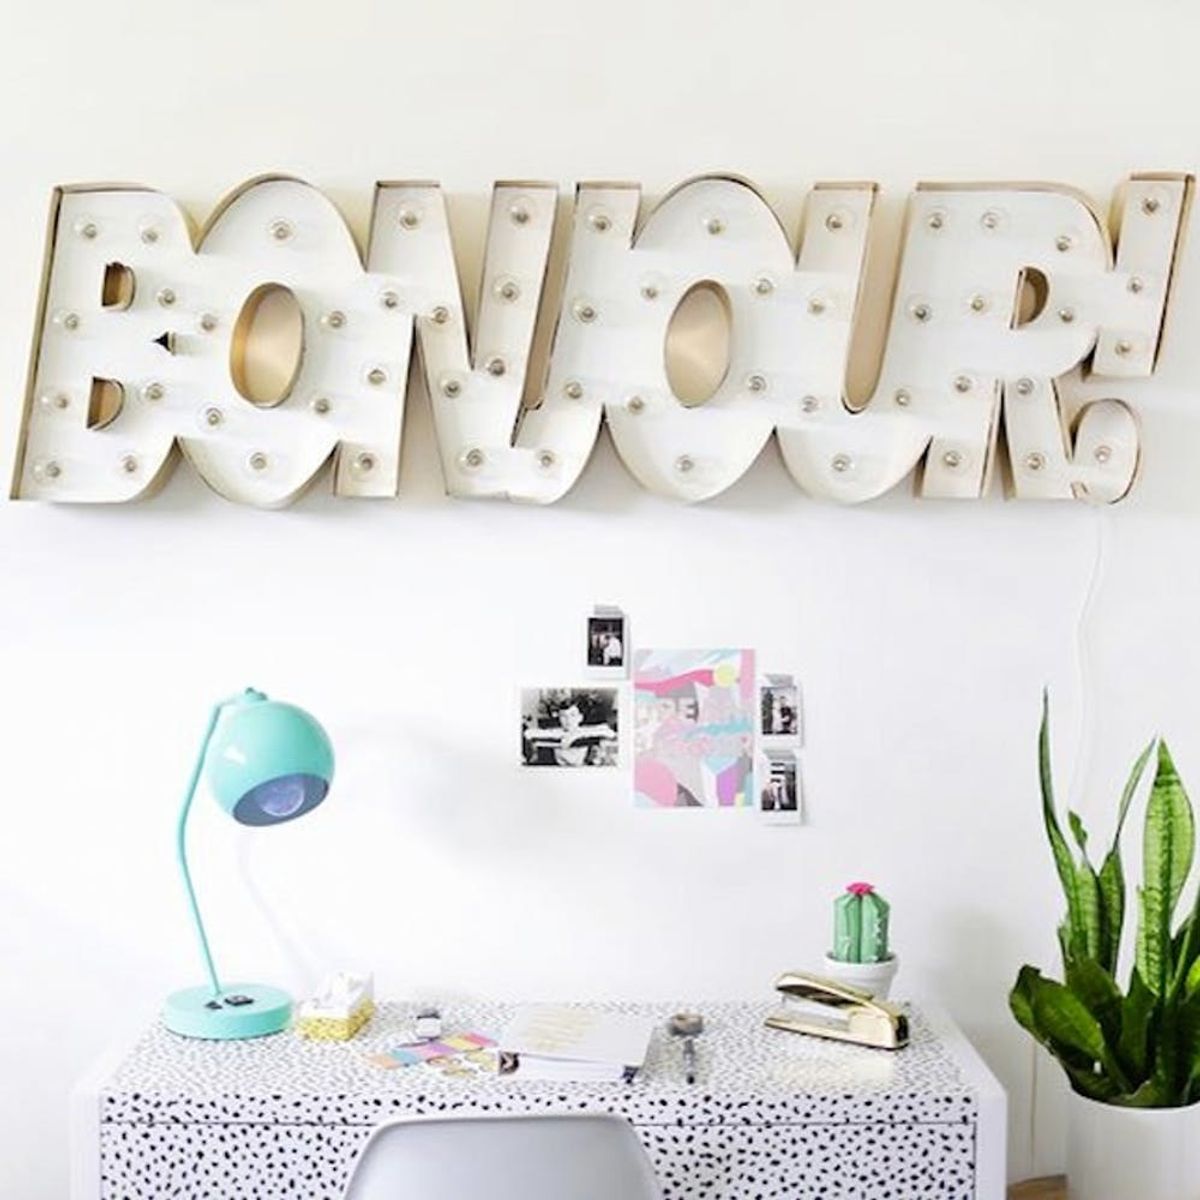 What to Make This Weekend: Marquee Wall Art, Instagram Coloring Pages + More